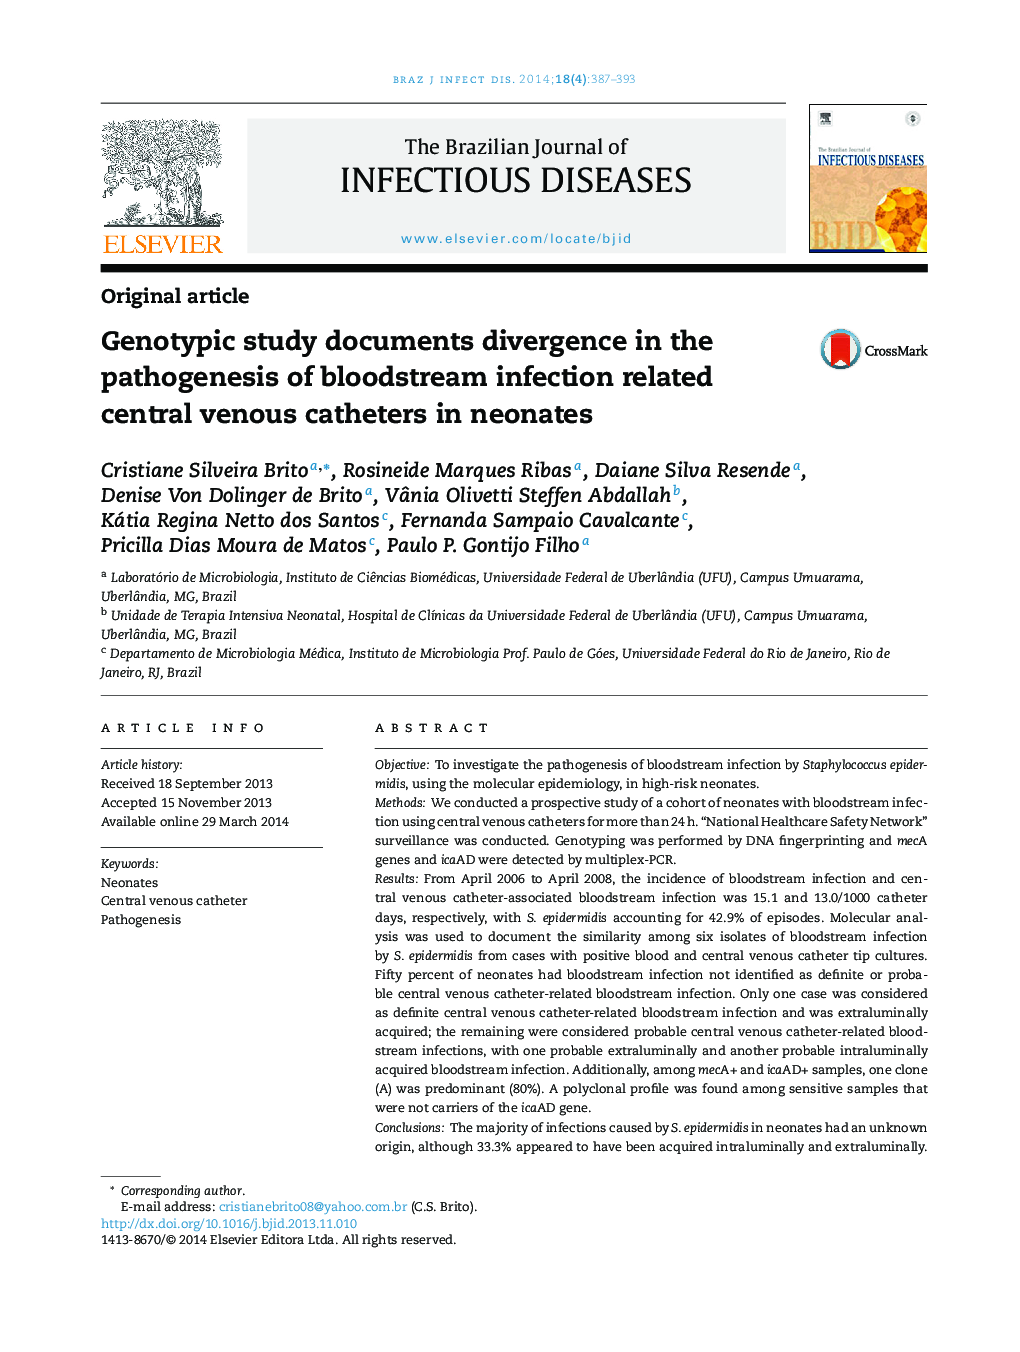 Genotypic study documents divergence in the pathogenesis of bloodstream infection related central venous catheters in neonates